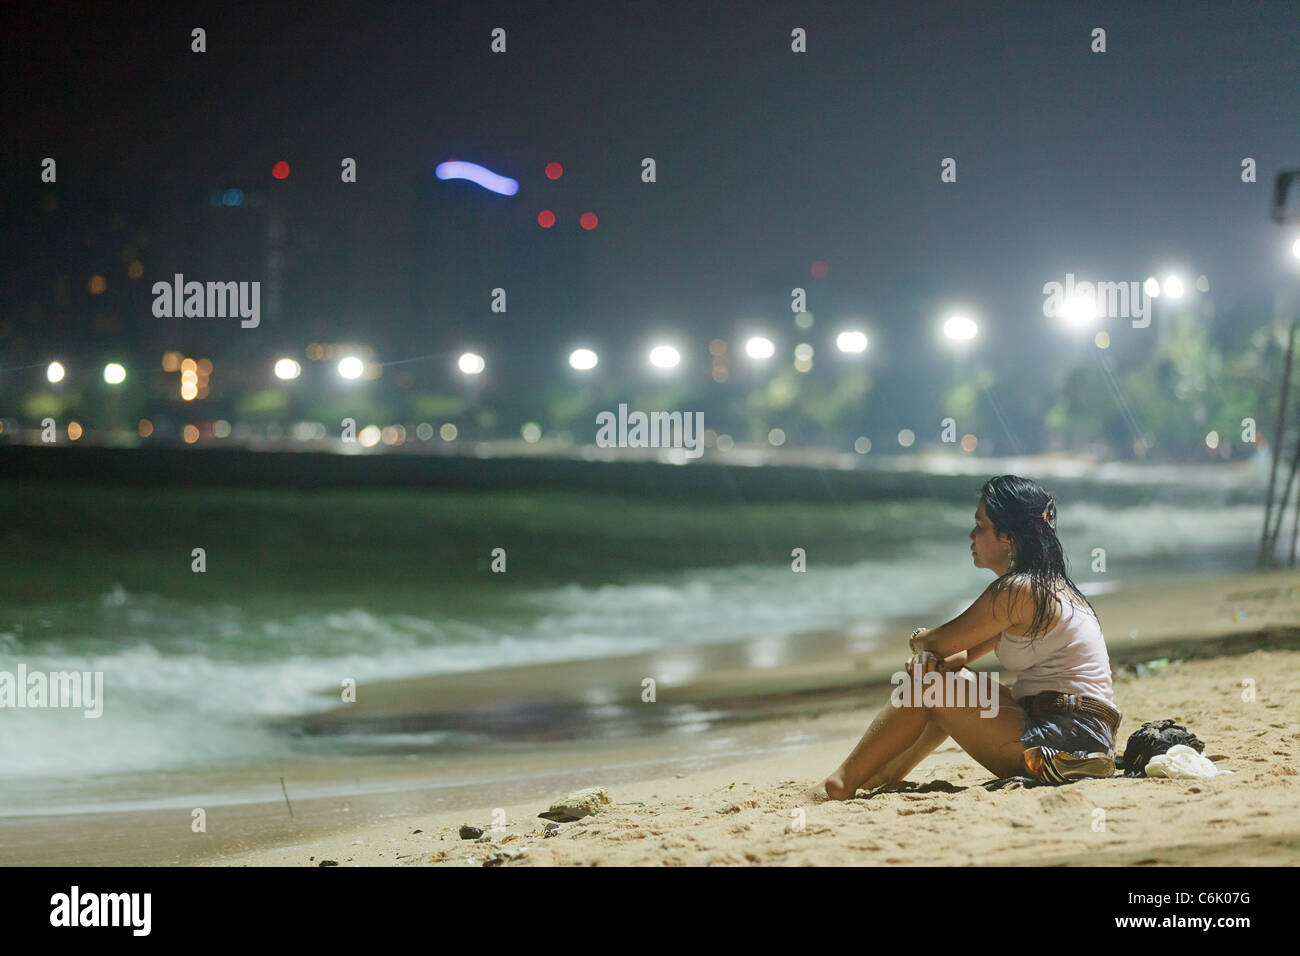 Thai Woman Wearing Wet Clothes High Resolution Stock Photography and ... photo